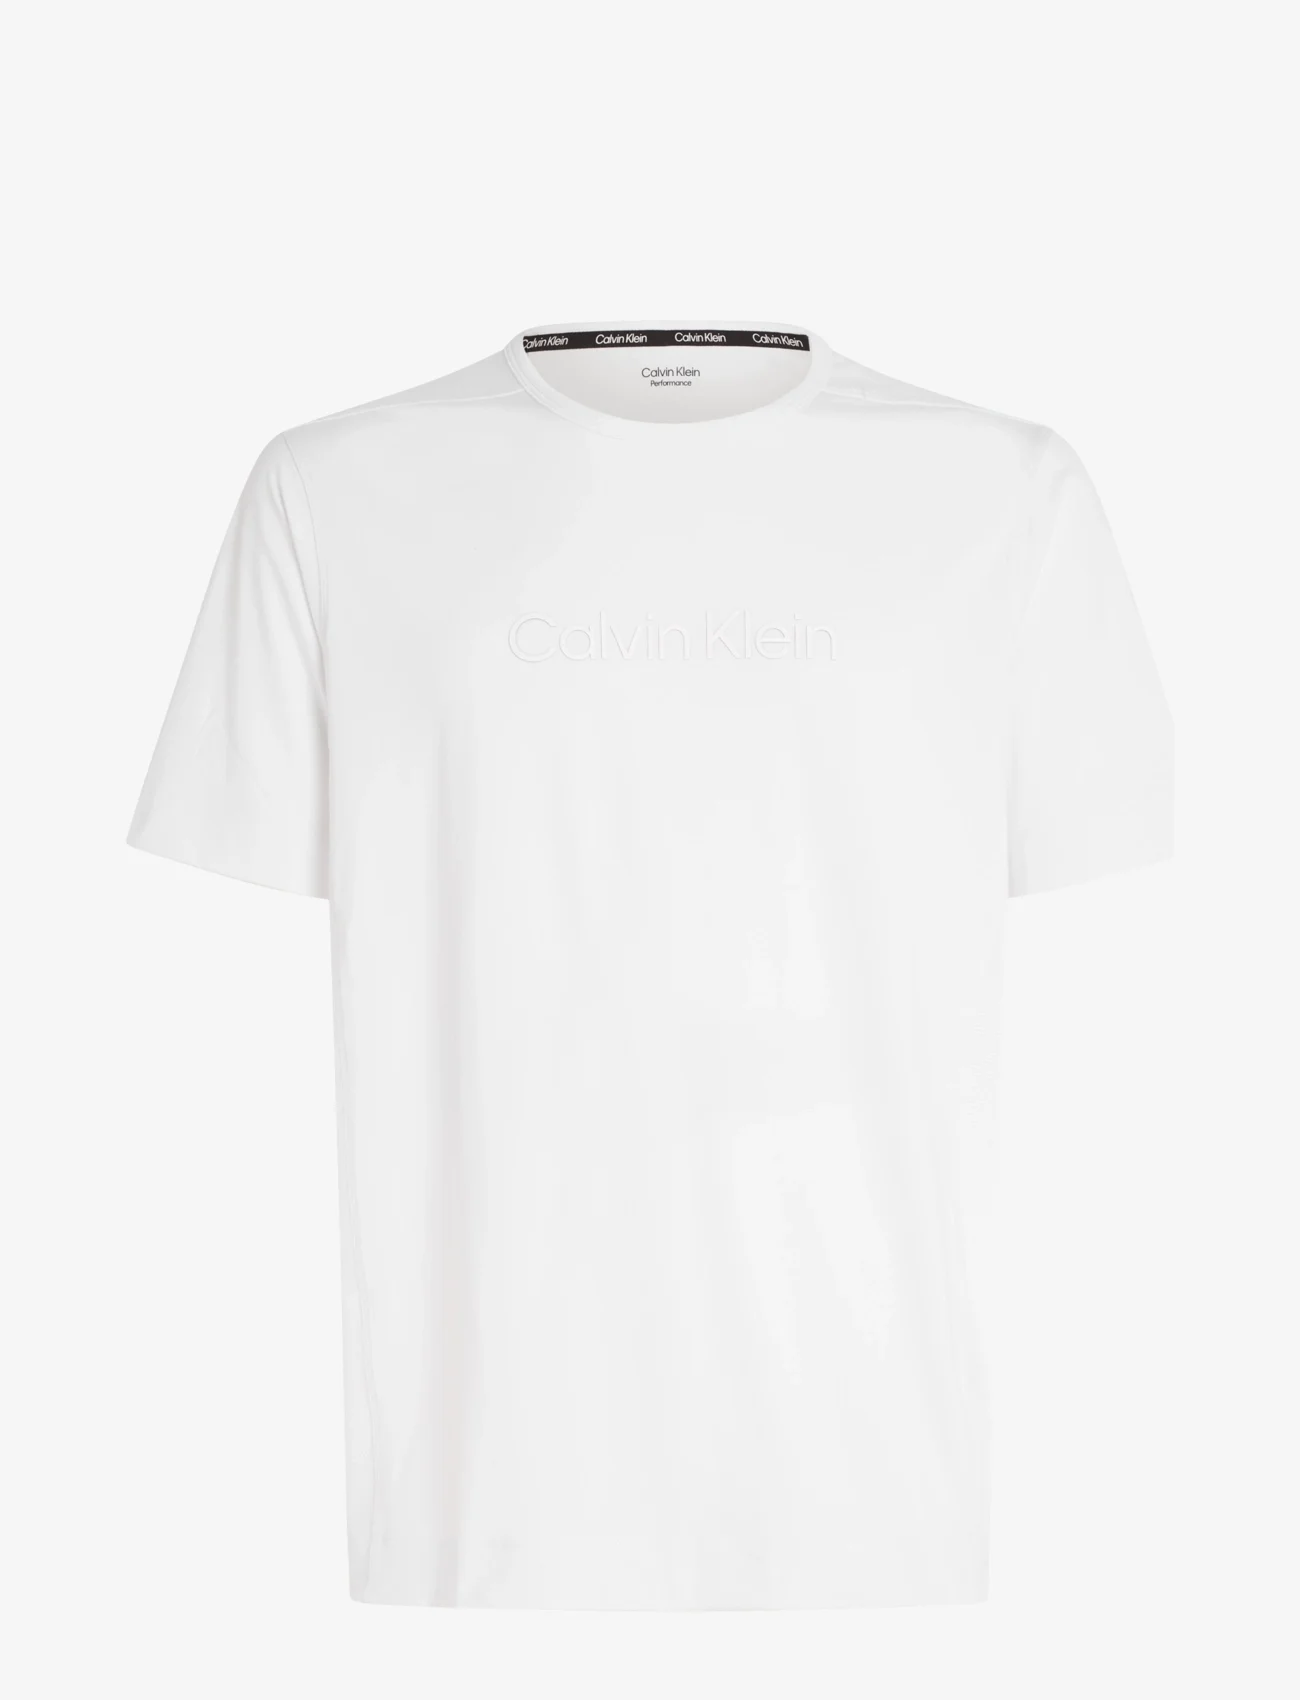 Calvin Klein Performance - WO - SS TEE - short-sleeved t-shirts - bright white - 0